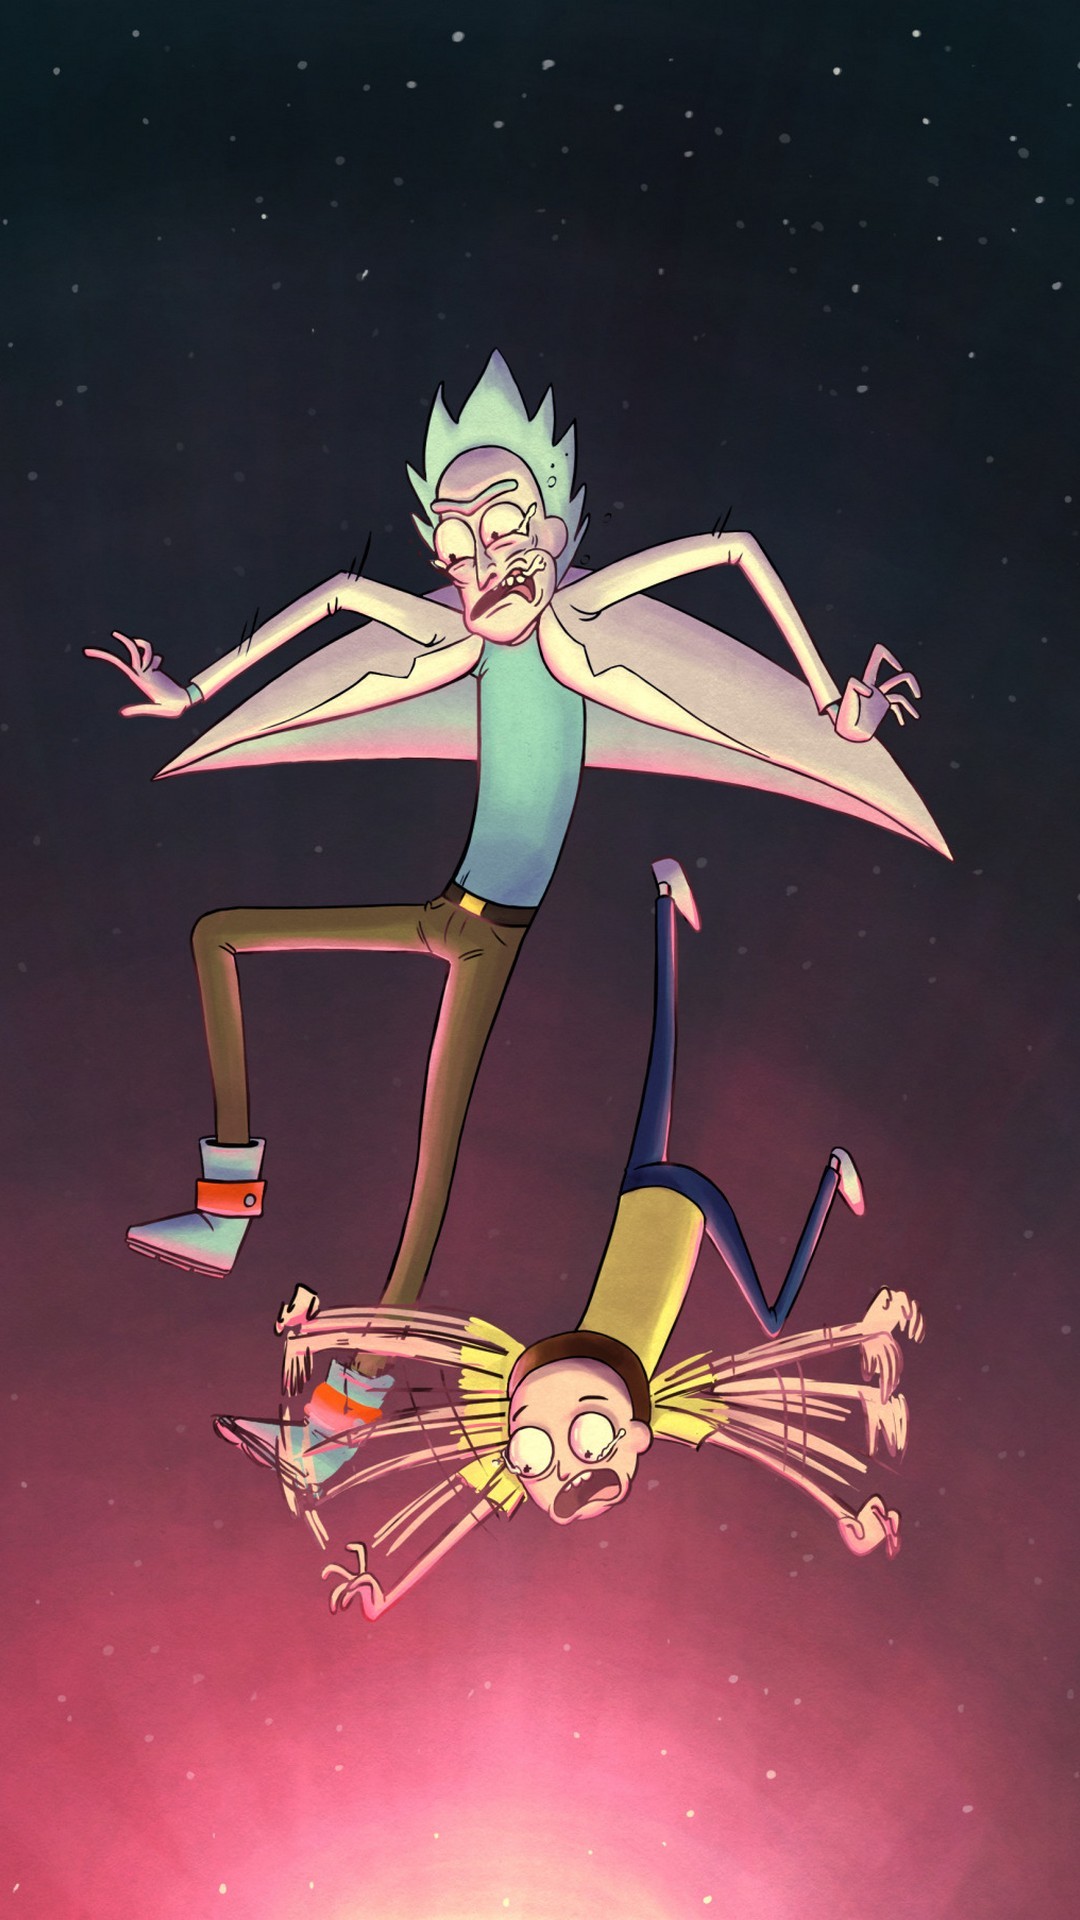 rick and morty wallpaper android,cartoon,illustration,animation,graphic design,fictional character